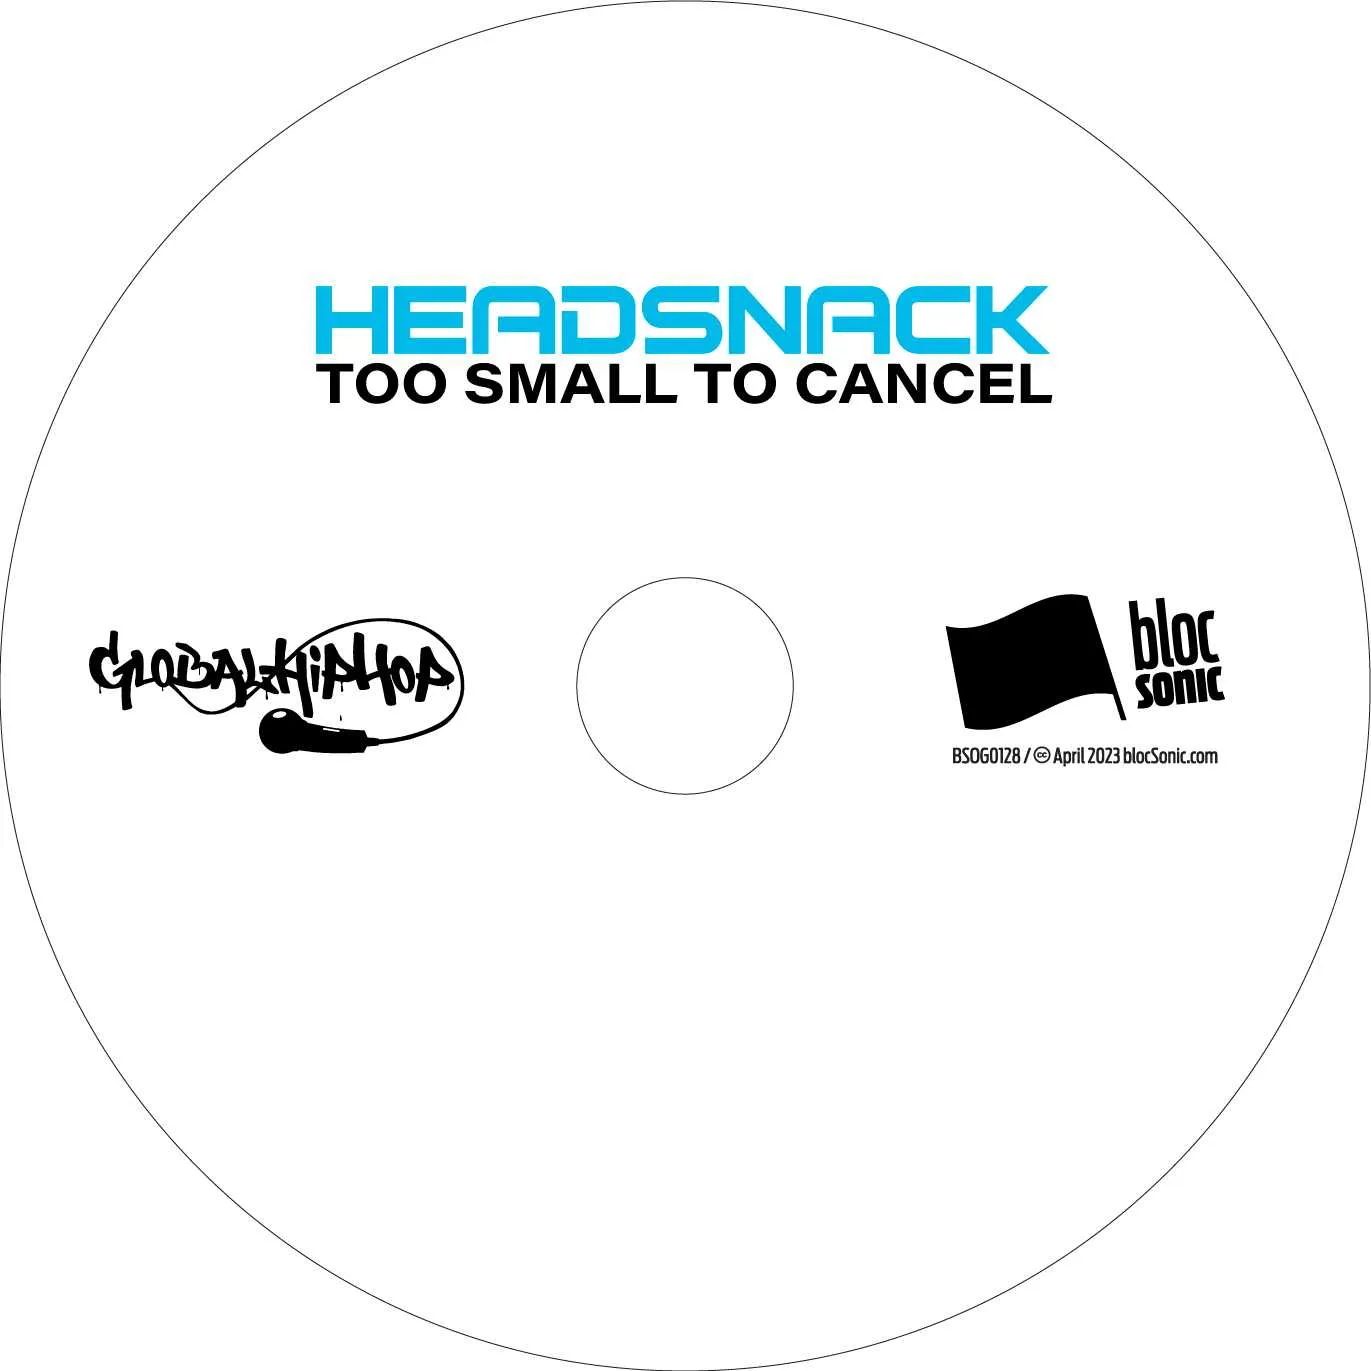 Album disc for “Too Small To Cancel” by Headsnack